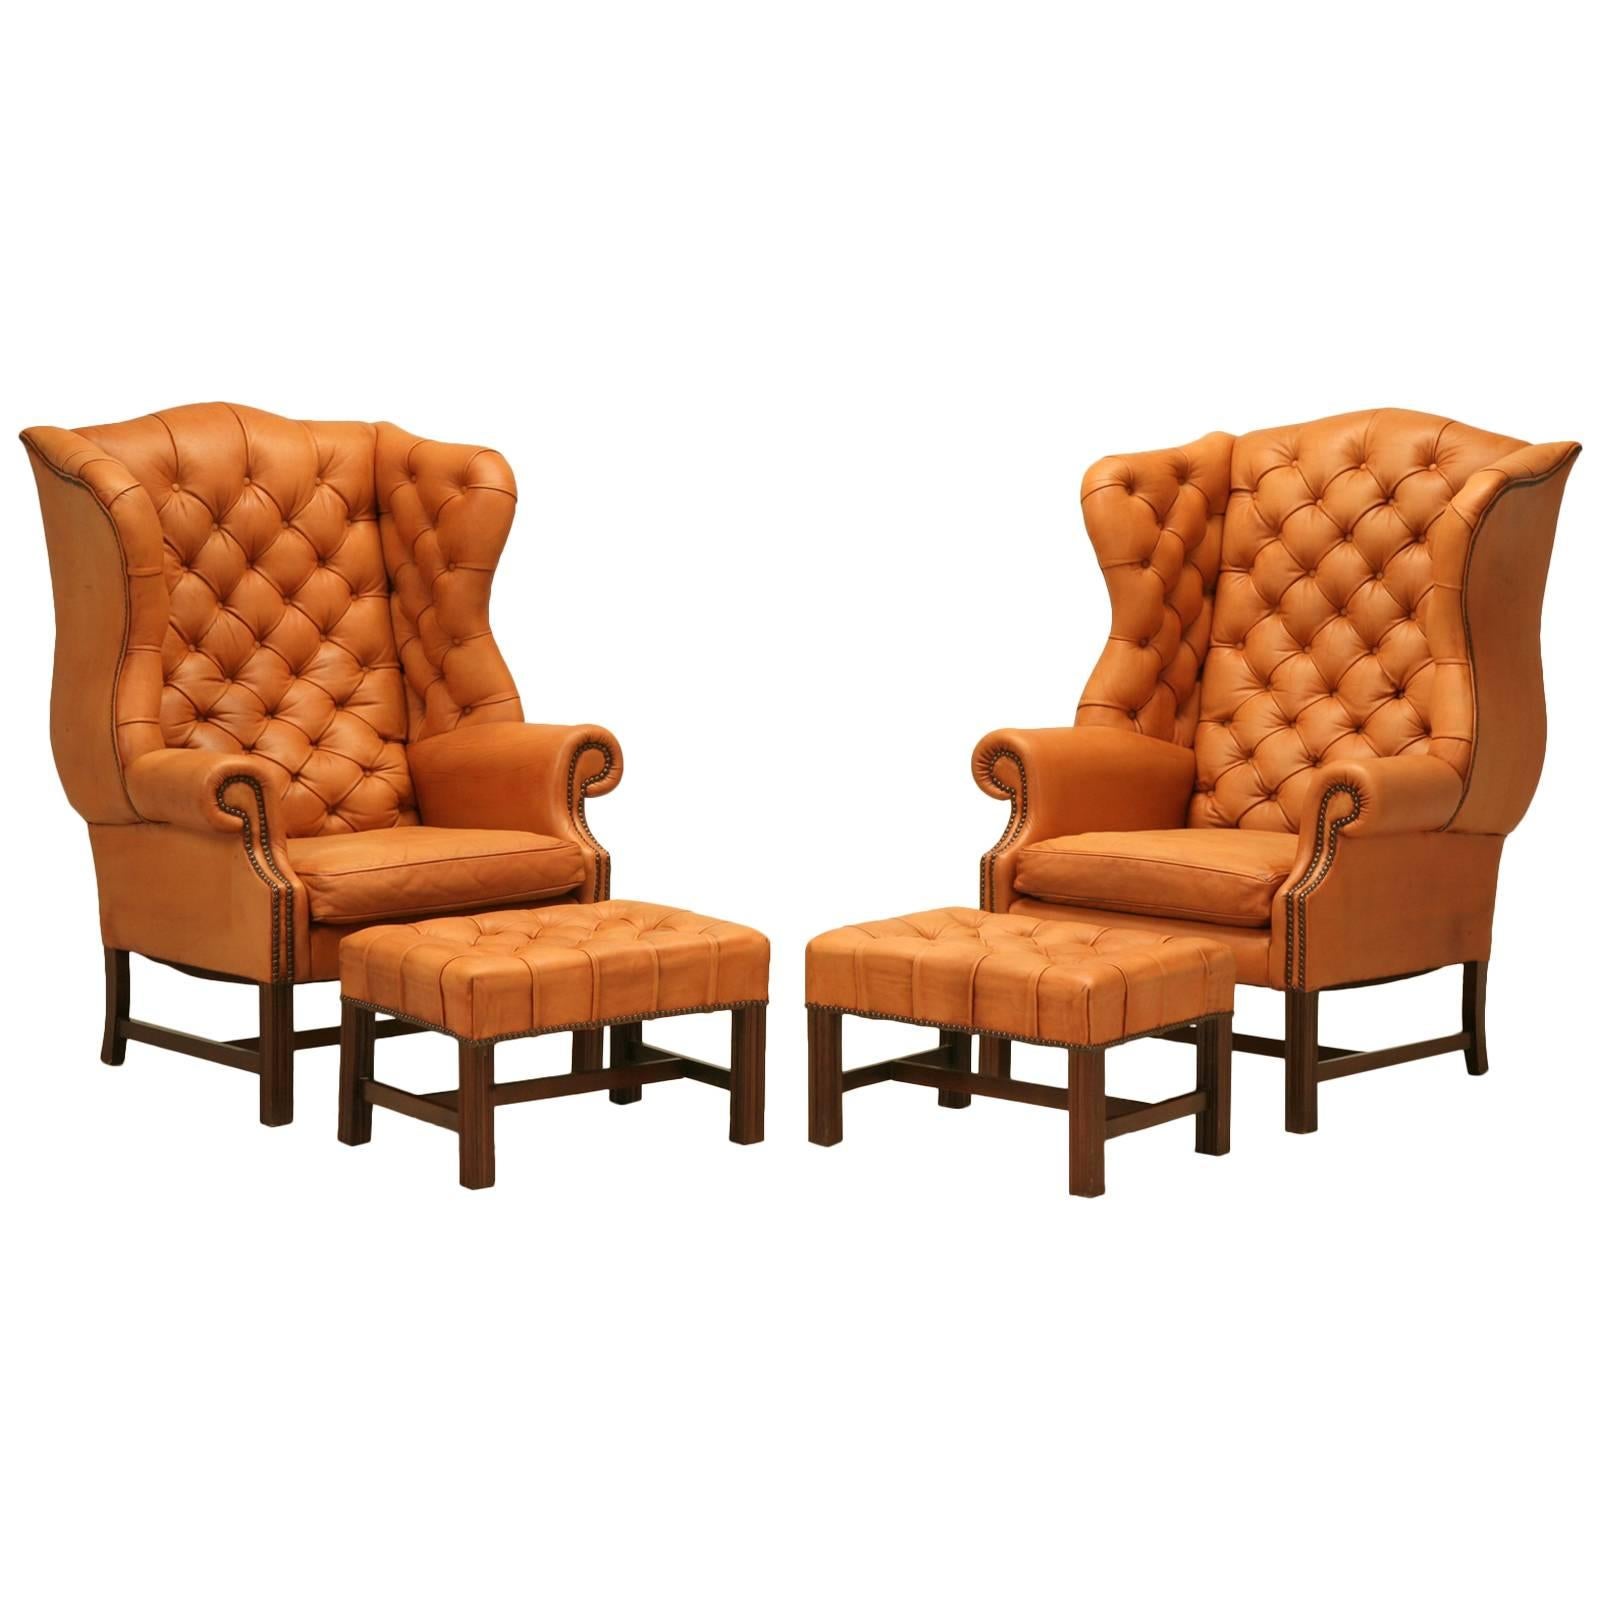 English Chesterfield Wingbacks with Matching Ottomans